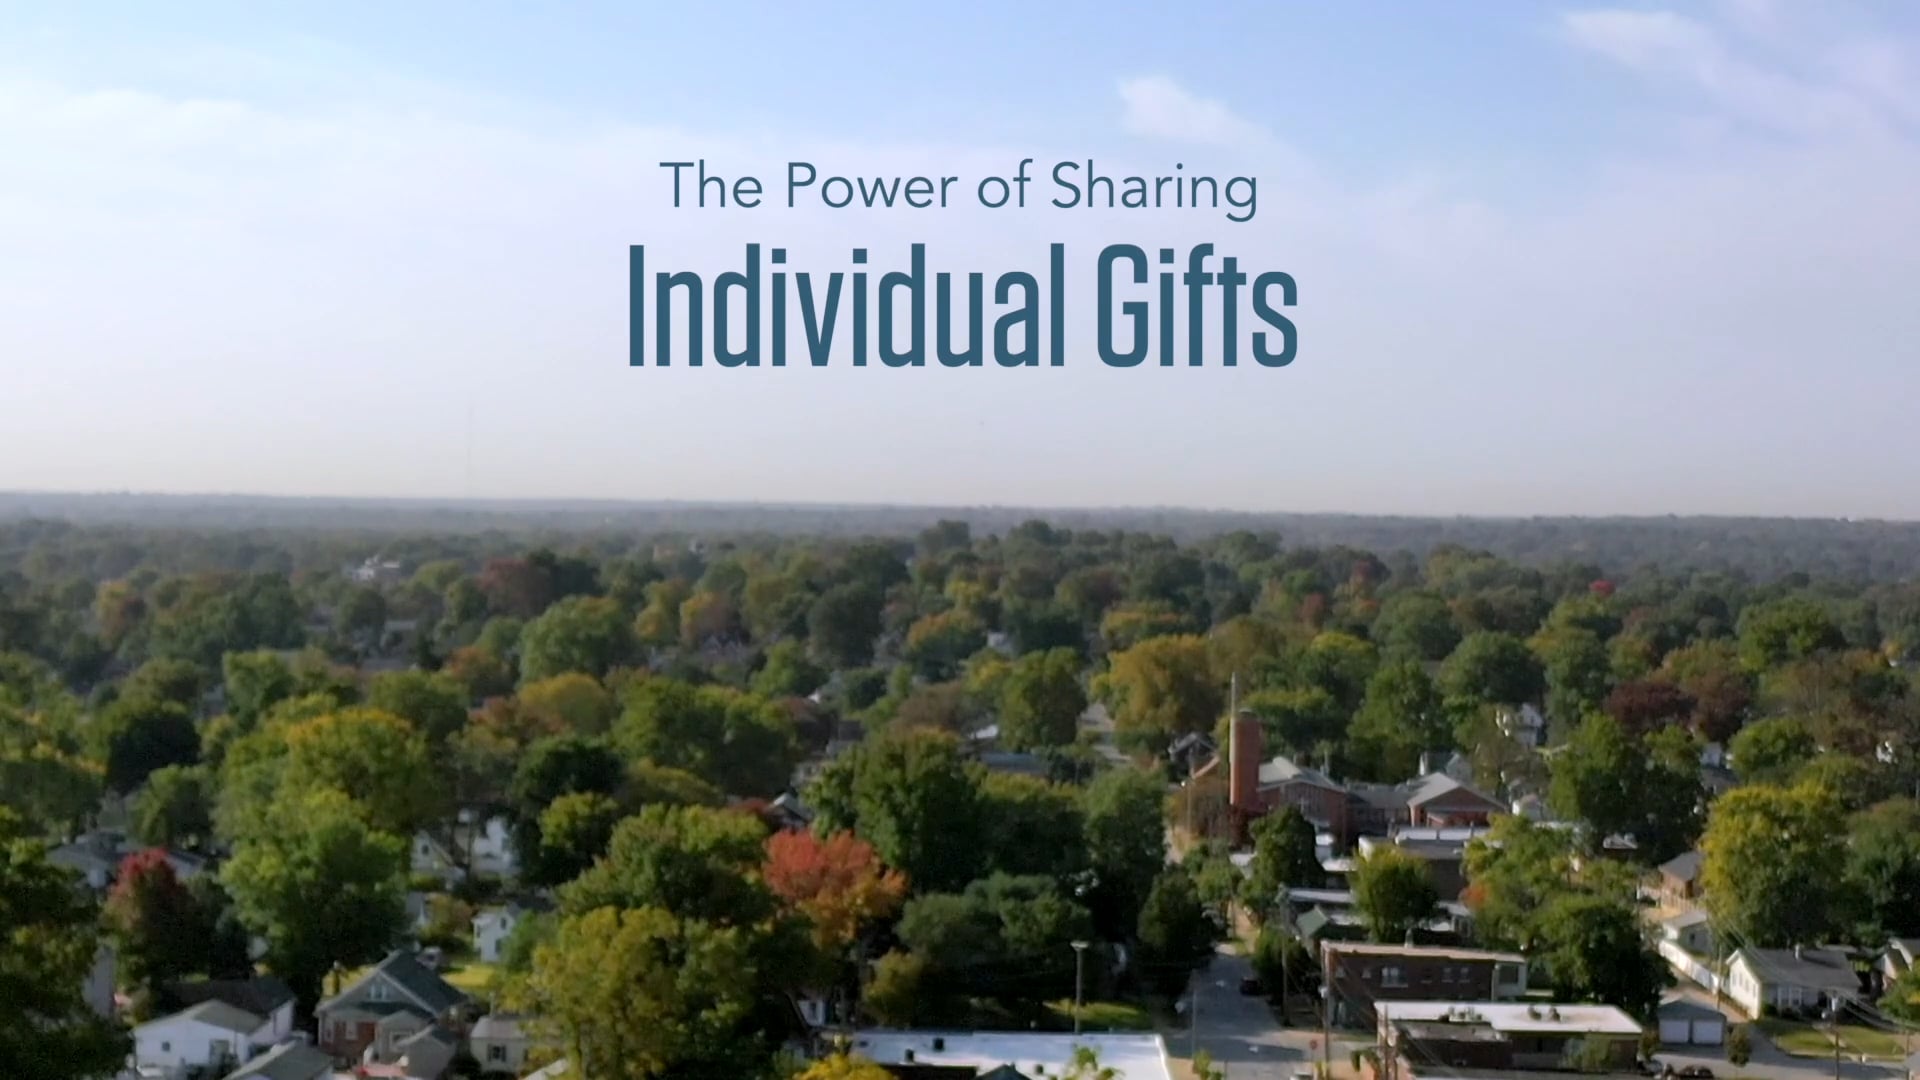 The Power of Sharing individual Gifts